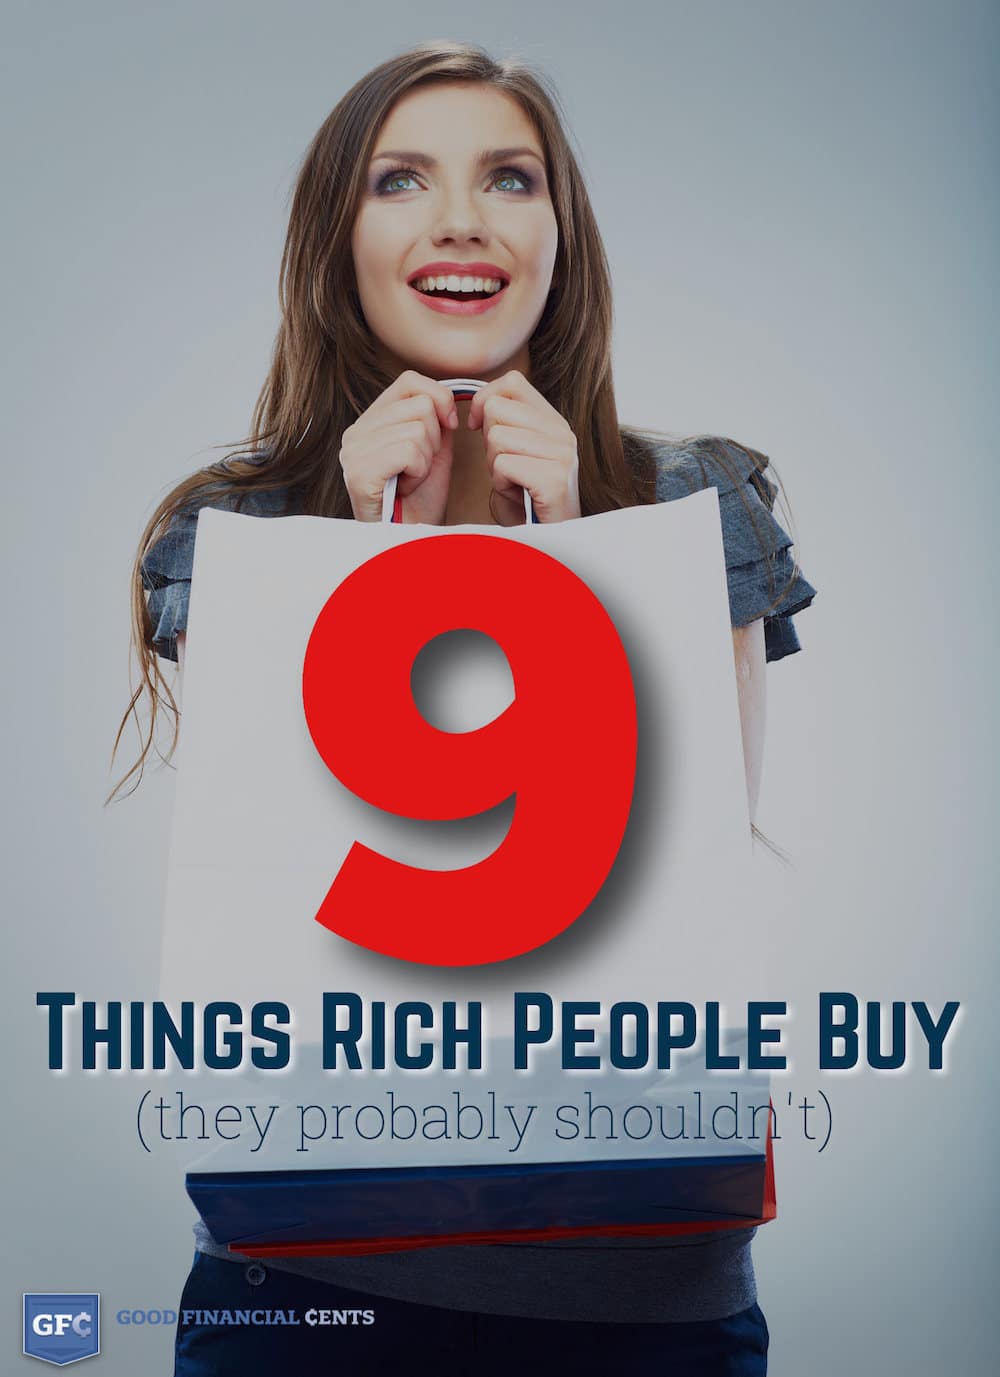 9 Silly Things Rich People Buy That Make Them Look Foolish - Good Financial Cents